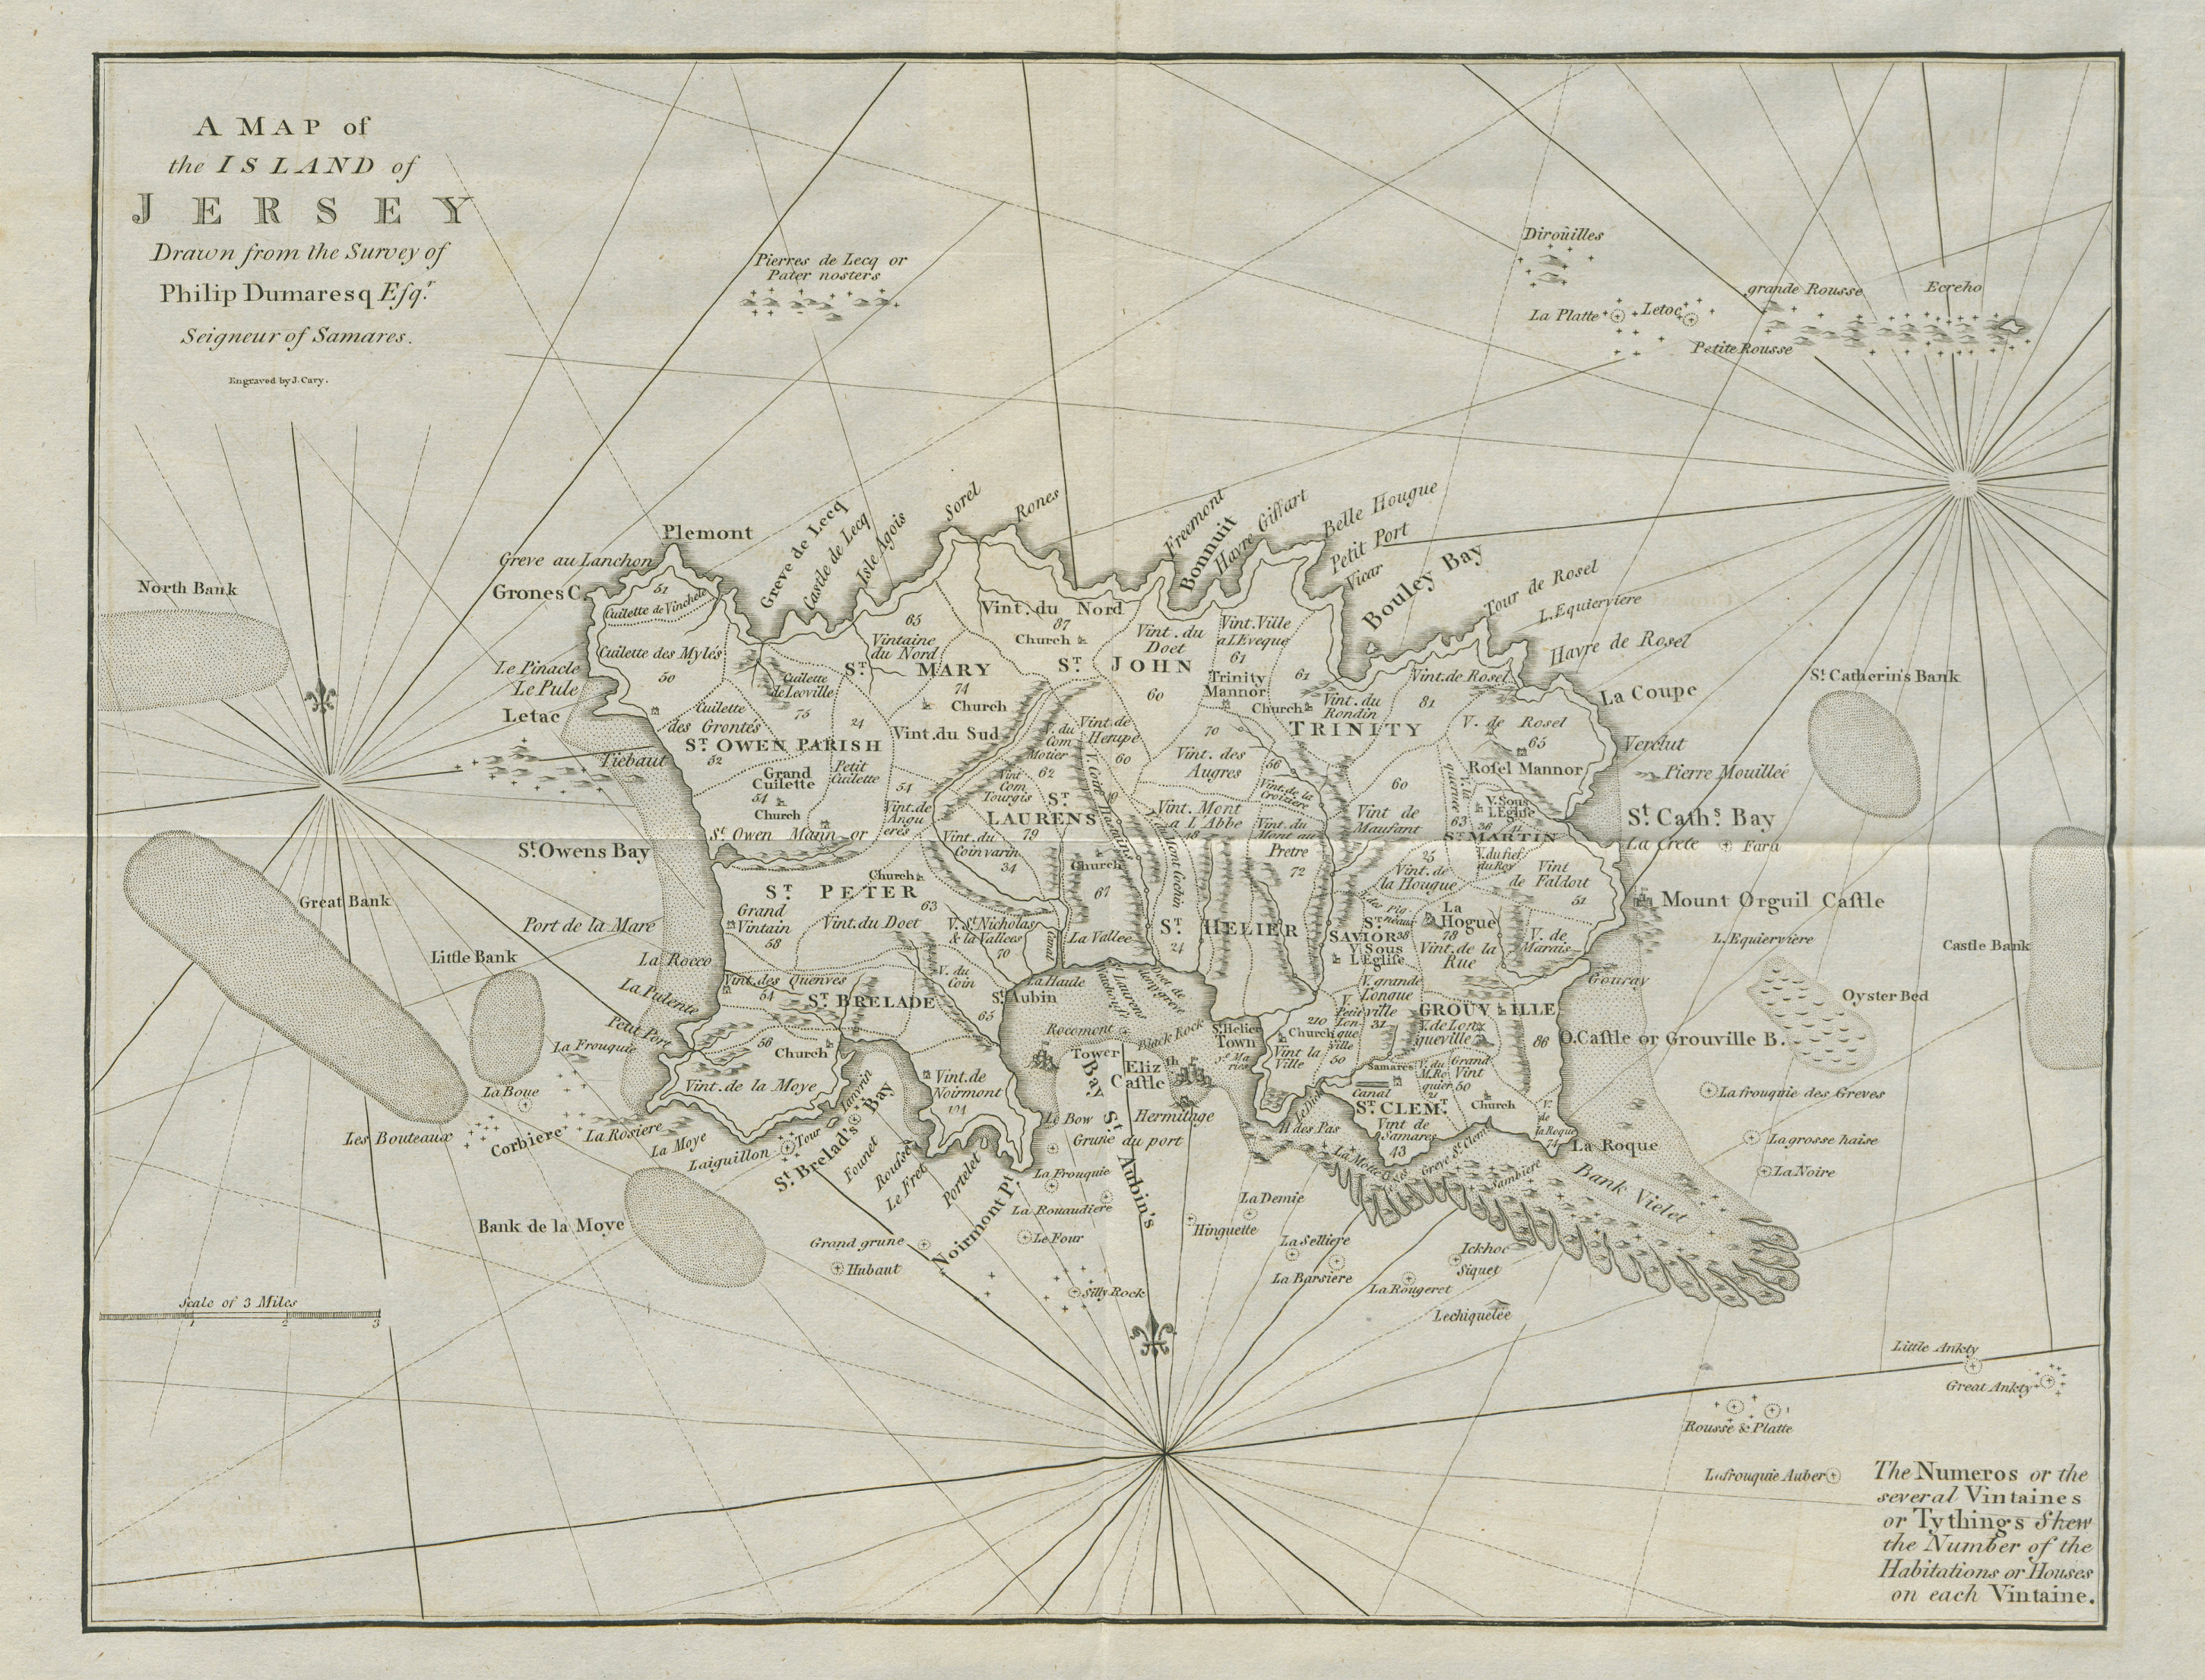 Associate Product A map of the Island of Jersey by John CARY / Dumaresq. Channel Islands 1789